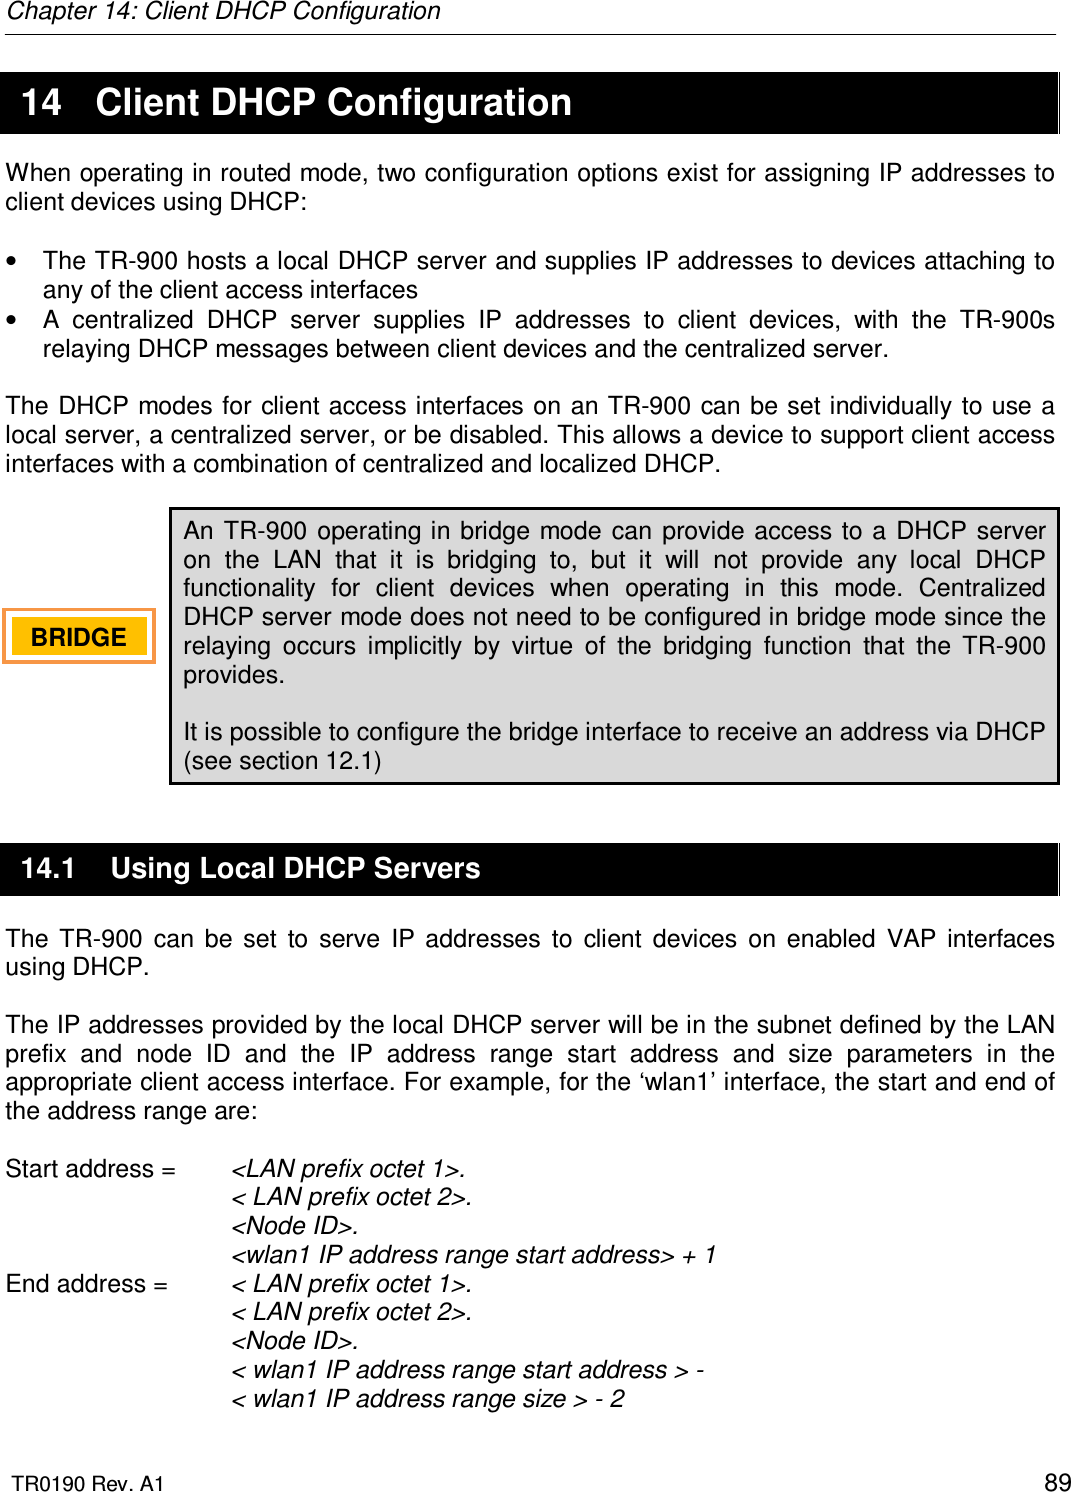 Chapter 14: Client DHCP Configuration  TR0190 Rev. A1    89 14  Client DHCP Configuration When operating in routed mode, two configuration options exist for assigning IP addresses to client devices using DHCP:  •  The TR-900 hosts a local DHCP server and supplies IP addresses to devices attaching to any of the client access interfaces  •  A  centralized  DHCP  server  supplies  IP  addresses  to  client  devices,  with  the  TR-900s relaying DHCP messages between client devices and the centralized server.  The DHCP modes for client access interfaces on an  TR-900 can be set individually to  use a local server, a centralized server, or be disabled. This allows a device to support client access interfaces with a combination of centralized and localized DHCP.  An TR-900  operating in bridge mode can provide access to a  DHCP  server on  the  LAN  that  it  is  bridging  to,  but  it  will  not  provide  any  local  DHCP functionality  for  client  devices  when  operating  in  this  mode.  Centralized DHCP server mode does not need to be configured in bridge mode since the relaying  occurs  implicitly  by  virtue  of  the  bridging  function  that  the  TR-900 provides.  It is possible to configure the bridge interface to receive an address via DHCP (see section 12.1) 14.1  Using Local DHCP Servers The  TR-900  can  be  set  to  serve  IP  addresses  to  client  devices  on  enabled  VAP  interfaces using DHCP.   The IP addresses provided by the local DHCP server will be in the subnet defined by the LAN prefix  and  node  ID  and  the  IP  address  range  start  address  and  size  parameters  in  the appropriate client access interface. For example, for the ‘wlan1’ interface, the start and end of the address range are:  Start address =   &lt;LAN prefix octet 1&gt;. &lt; LAN prefix octet 2&gt;. &lt;Node ID&gt;. &lt;wlan1 IP address range start address&gt; + 1 End address =   &lt; LAN prefix octet 1&gt;. &lt; LAN prefix octet 2&gt;. &lt;Node ID&gt;. &lt; wlan1 IP address range start address &gt; -  &lt; wlan1 IP address range size &gt; - 2 BRIDGE   